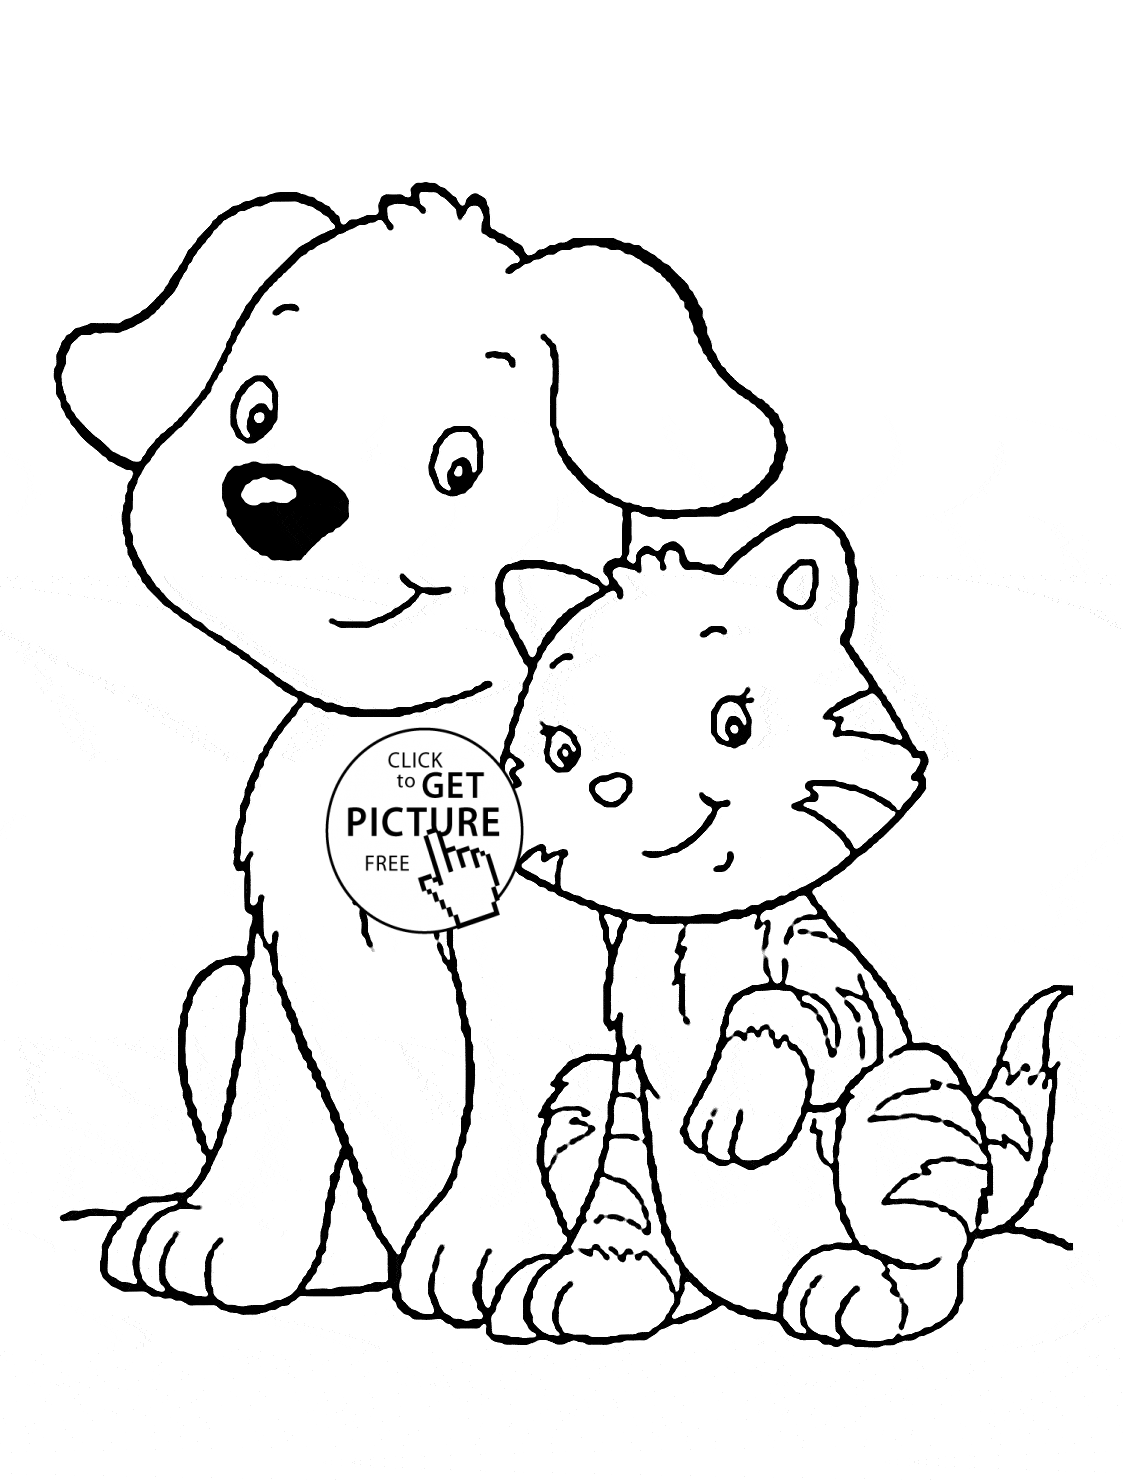 printable coloring pages cats and dogs dog and cat coloring pages hellokidscom dogs and cats coloring pages printable 